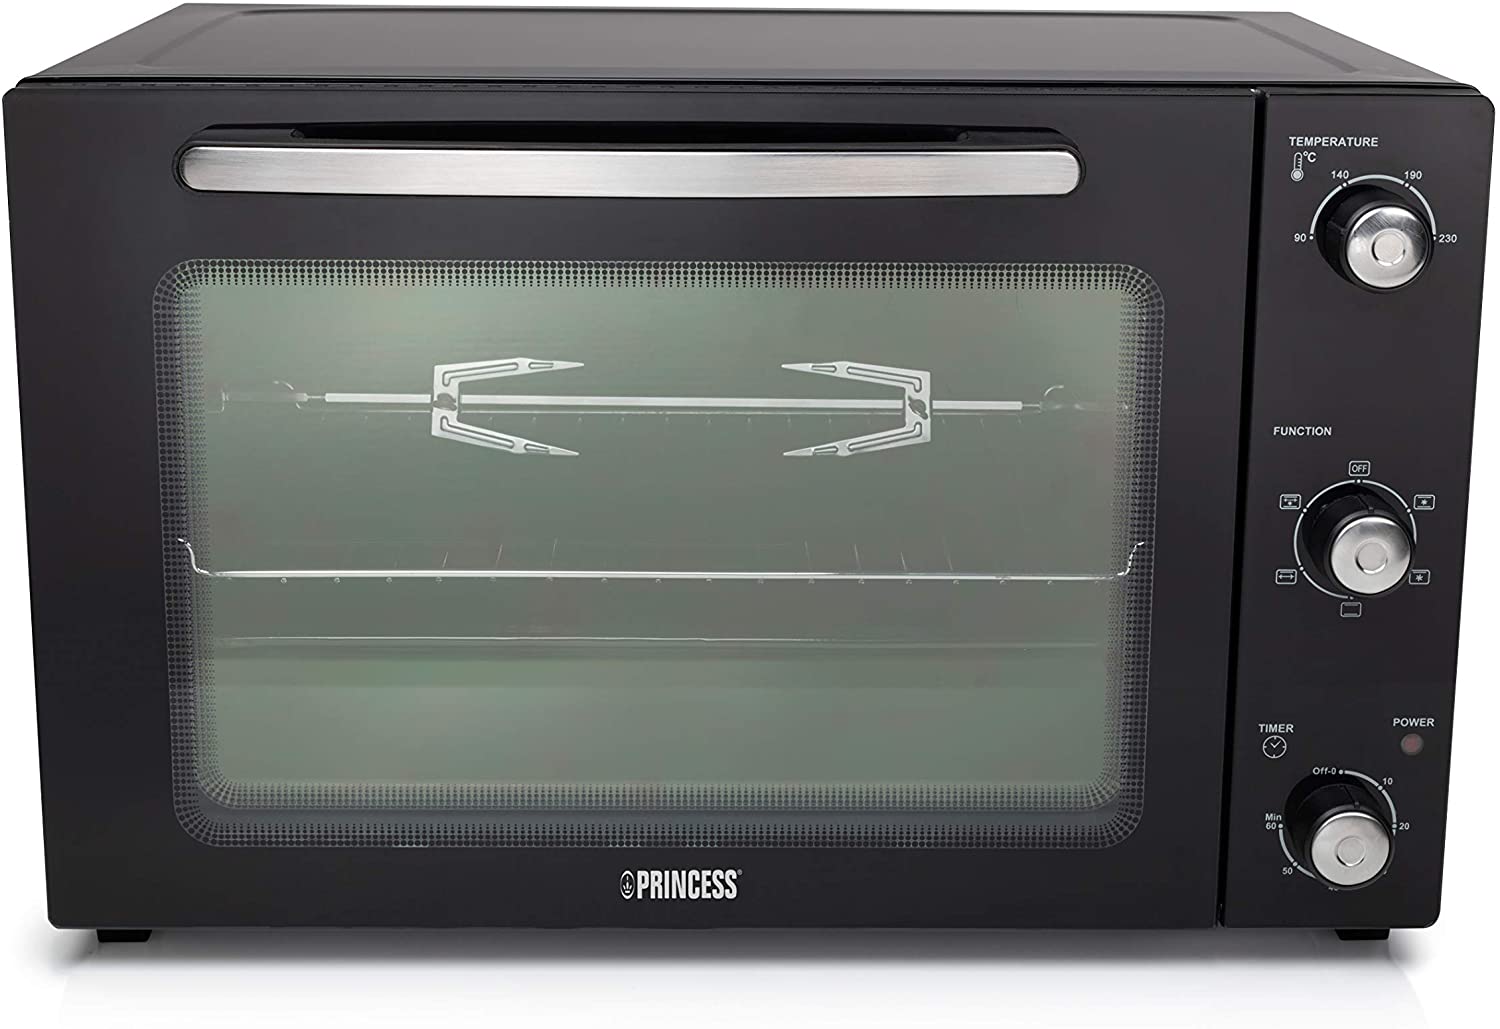 Princess DeLuxe 2200 01.112761.01.001 Convection Oven Metal Black